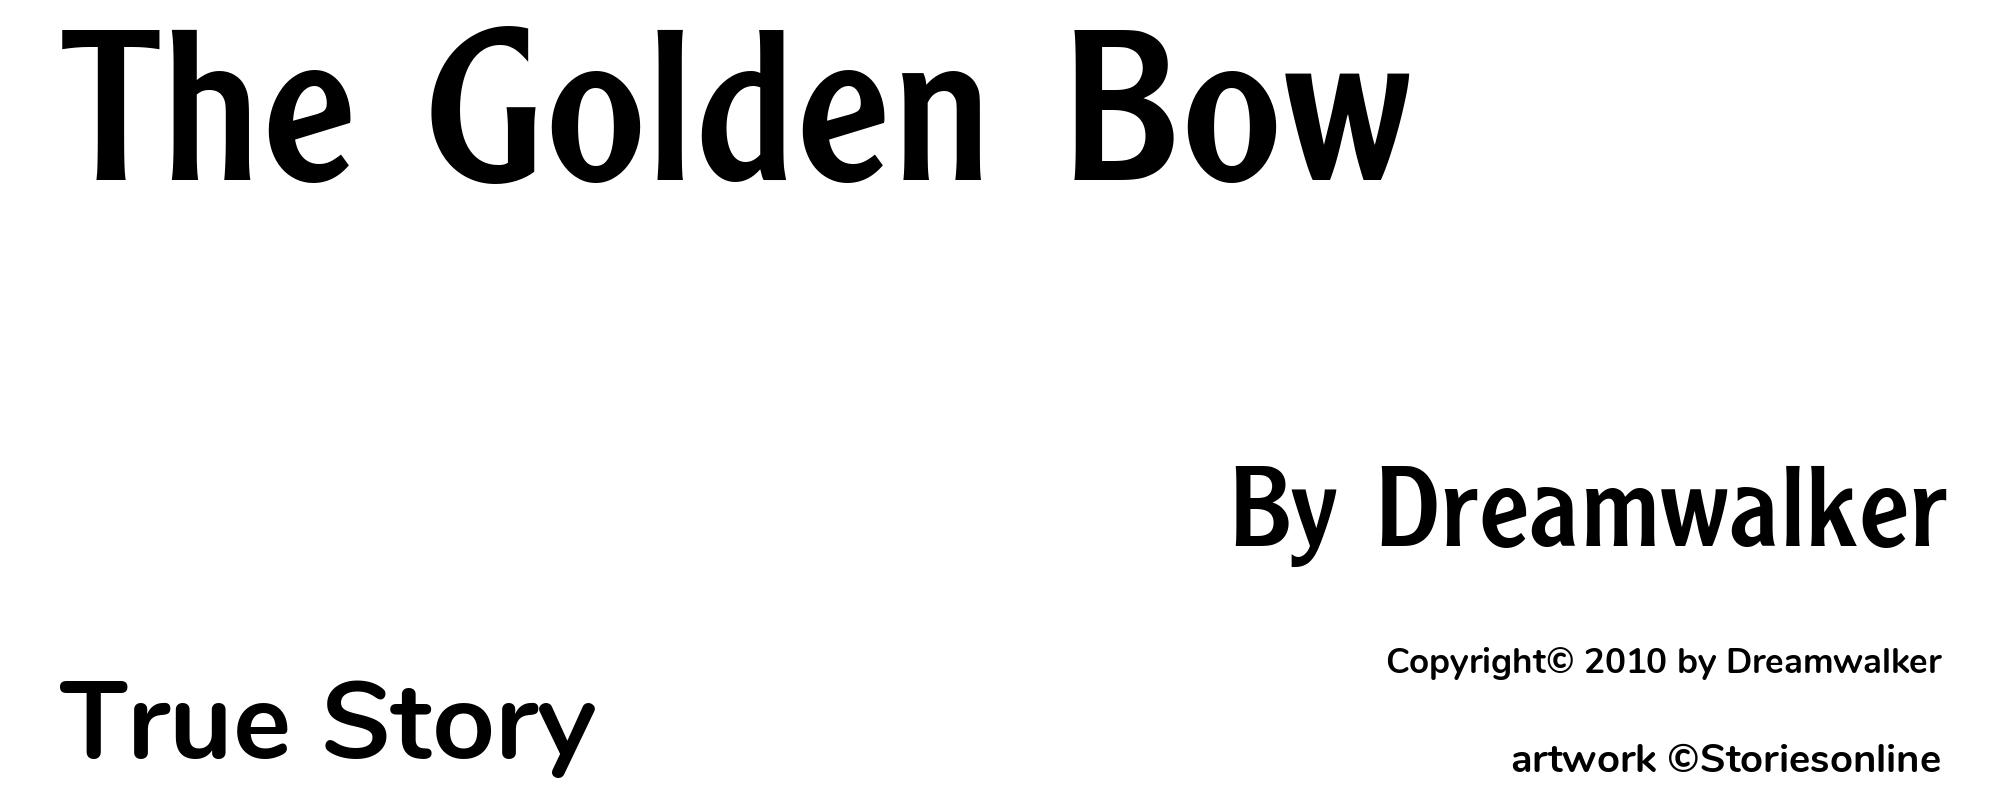 The Golden Bow - Cover